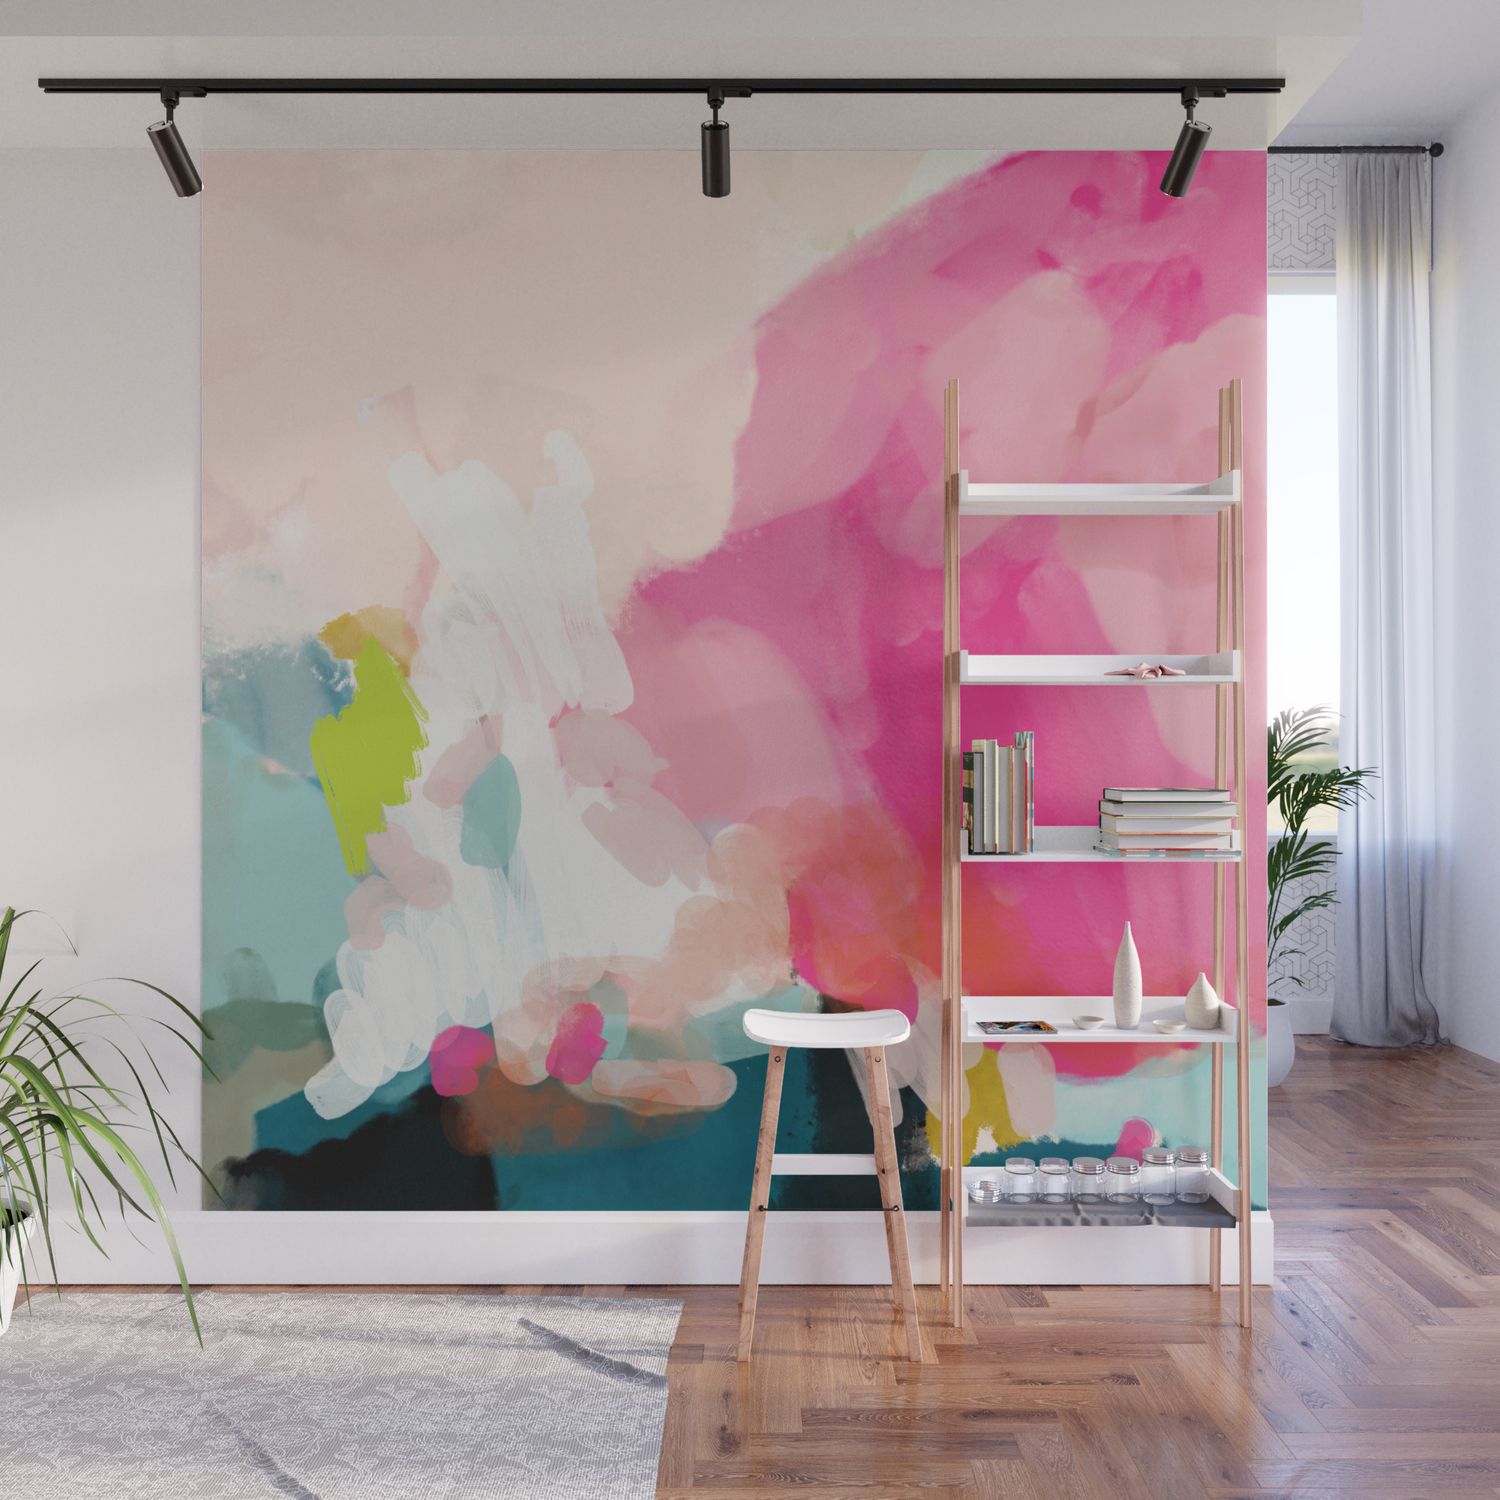 Pink Sky Wall Murallalunetricotee Art Paintings | Society6 Intended For Latest Pink Sky Wall Art (View 7 of 20)